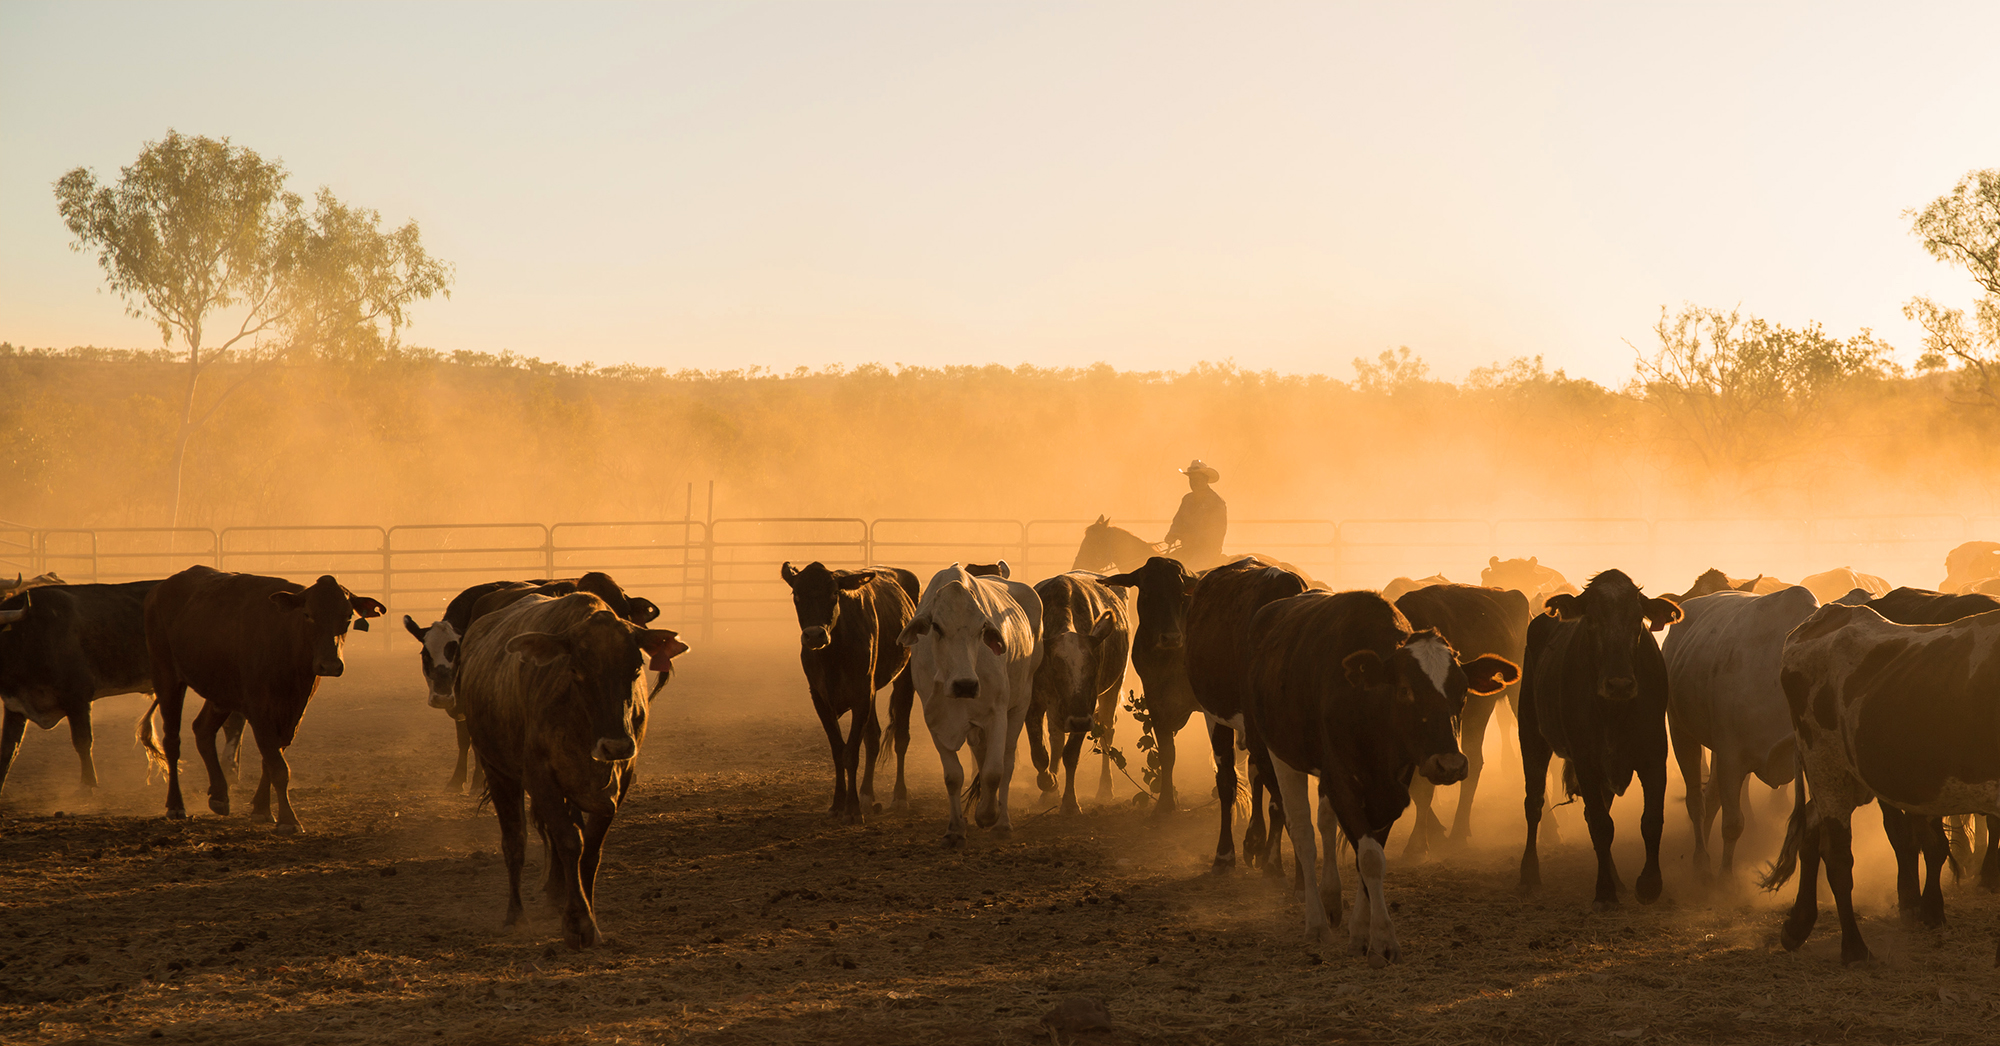 A picturesque scene of a thriving herd of cattle in the field under the warm embrace of the sunset, brought to you by our dedicated producers.